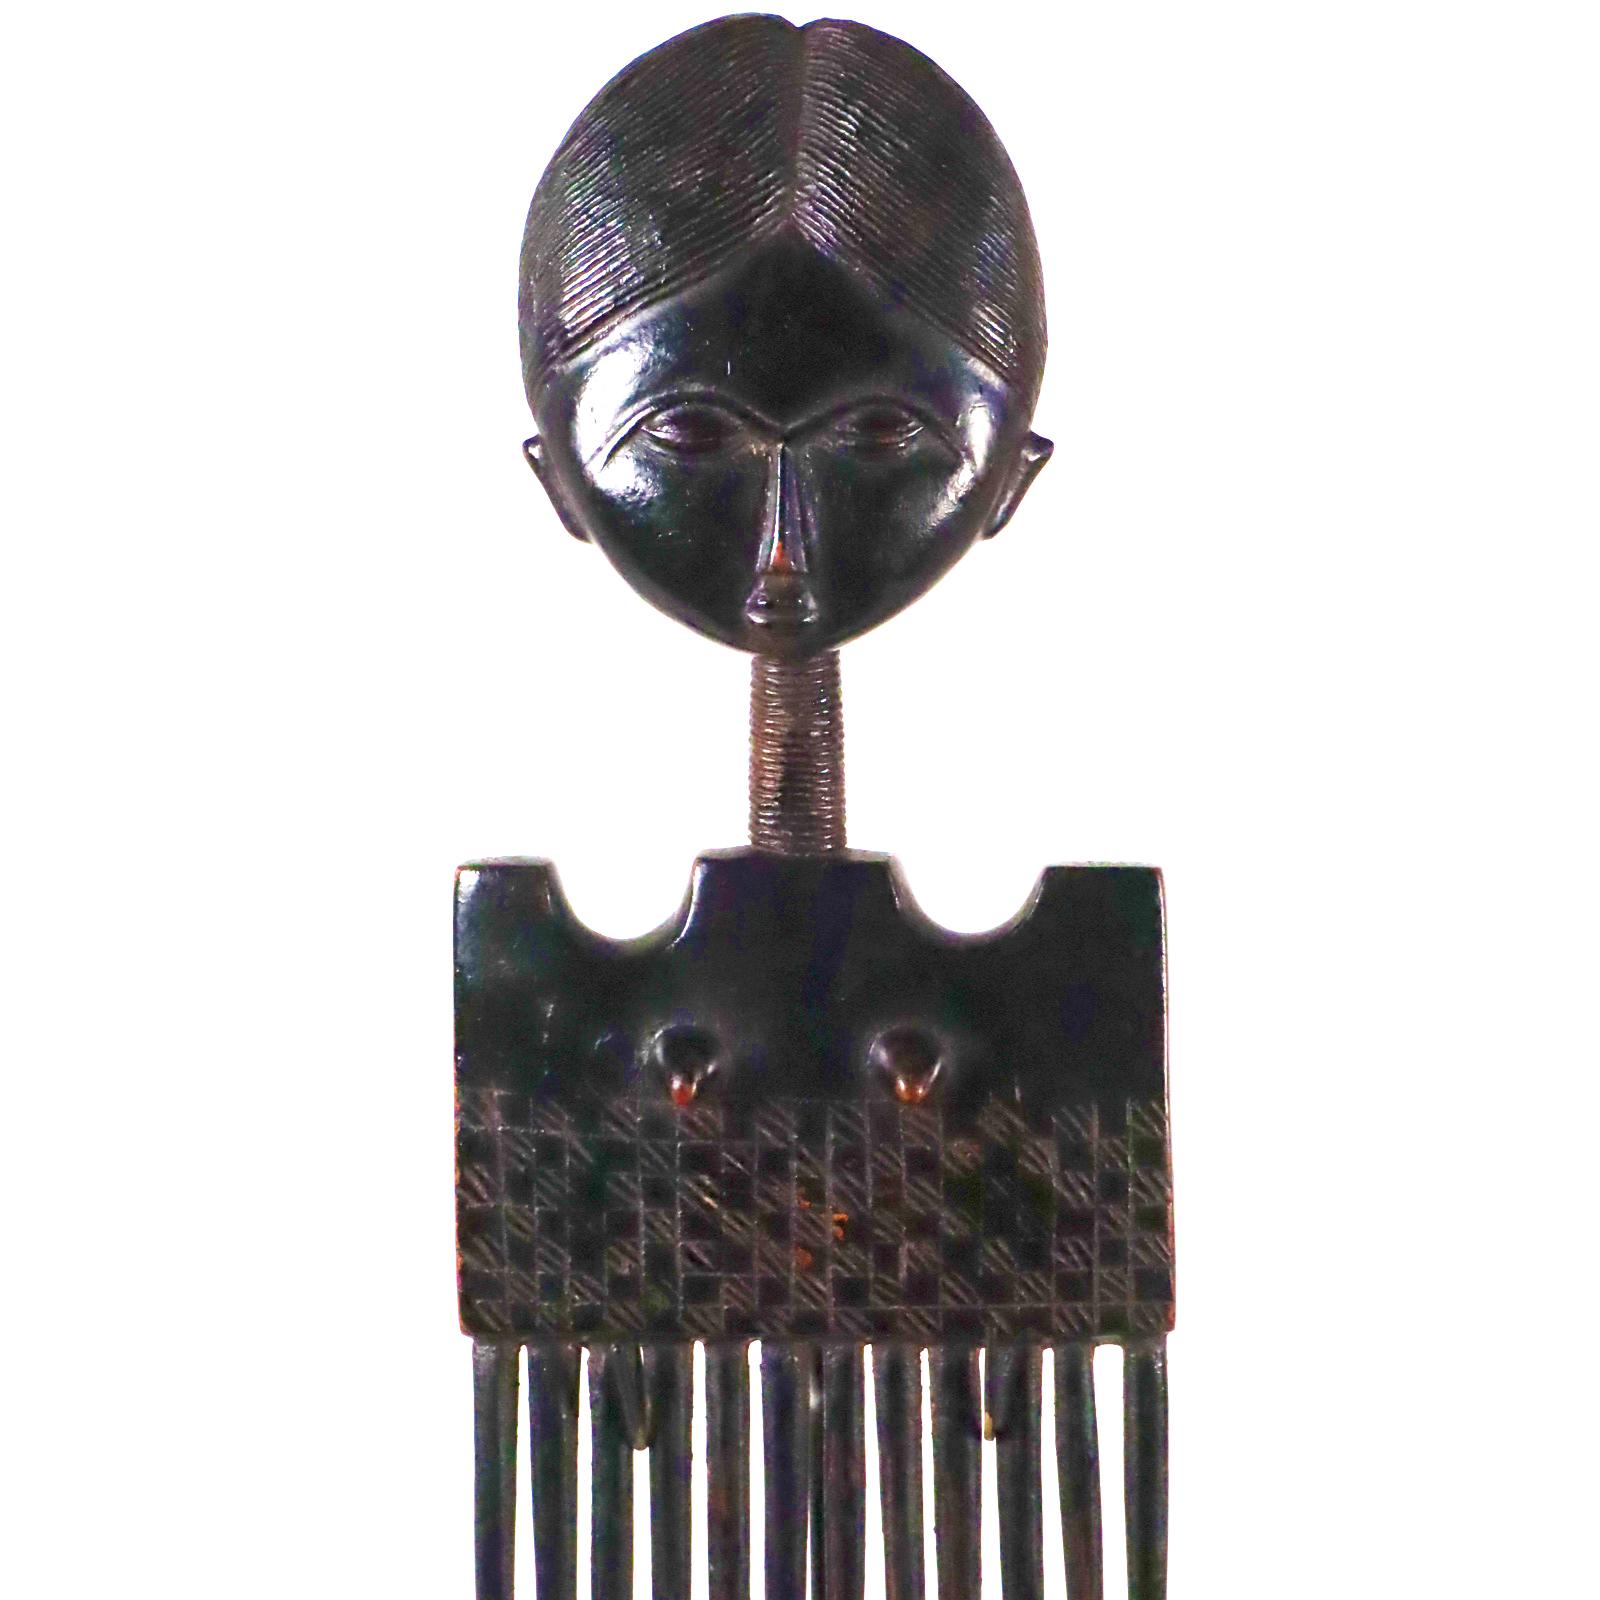 A magnificent hair ornament or comb from the Akan Ashanti (var. Asante) people of Ghana. Most likely created in the mid-20th century, prior to 1970. Carved from hardwood covered with black pigment polished to a high sheen.
Provenance:
Mr. & Mrs.